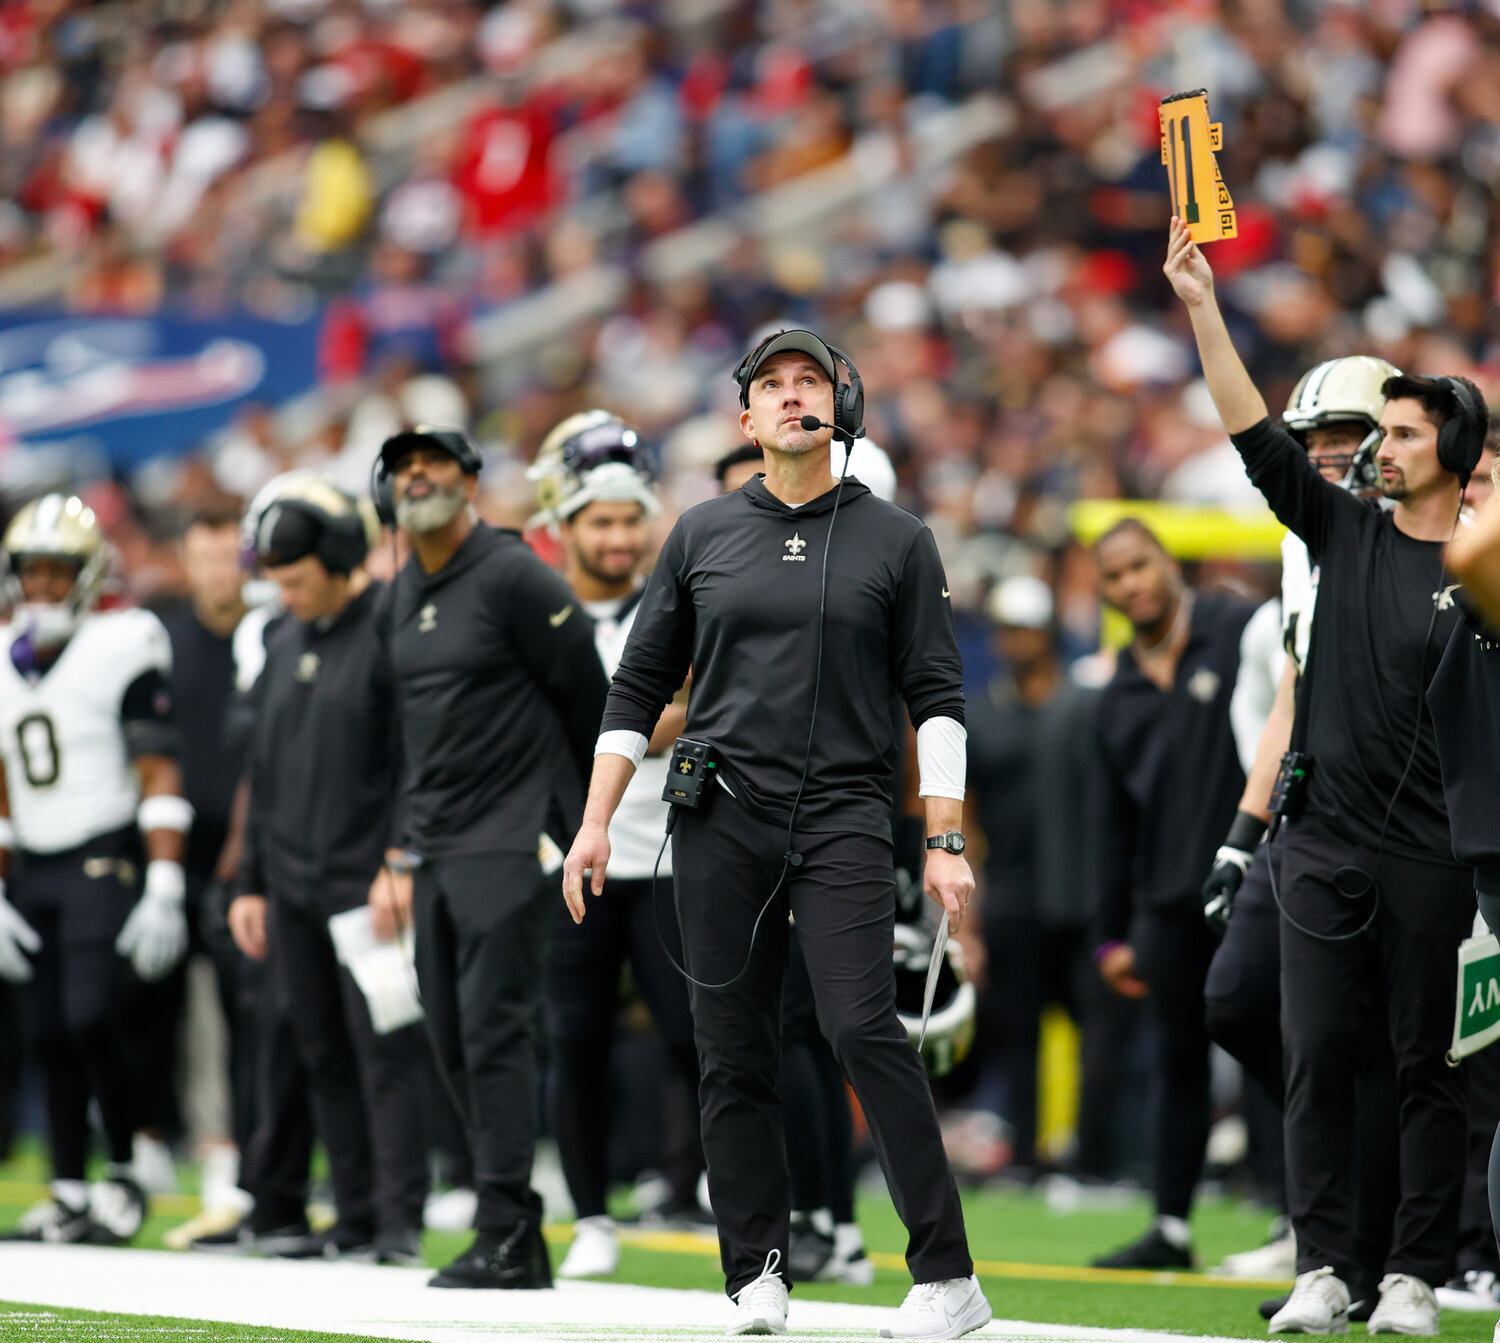 Saints head coach Dennis Allen looks up at a replay on the video board during an NFL game between the Texans and the Saints on October 15, 2023 in Houston. The Texans won, 20-13.